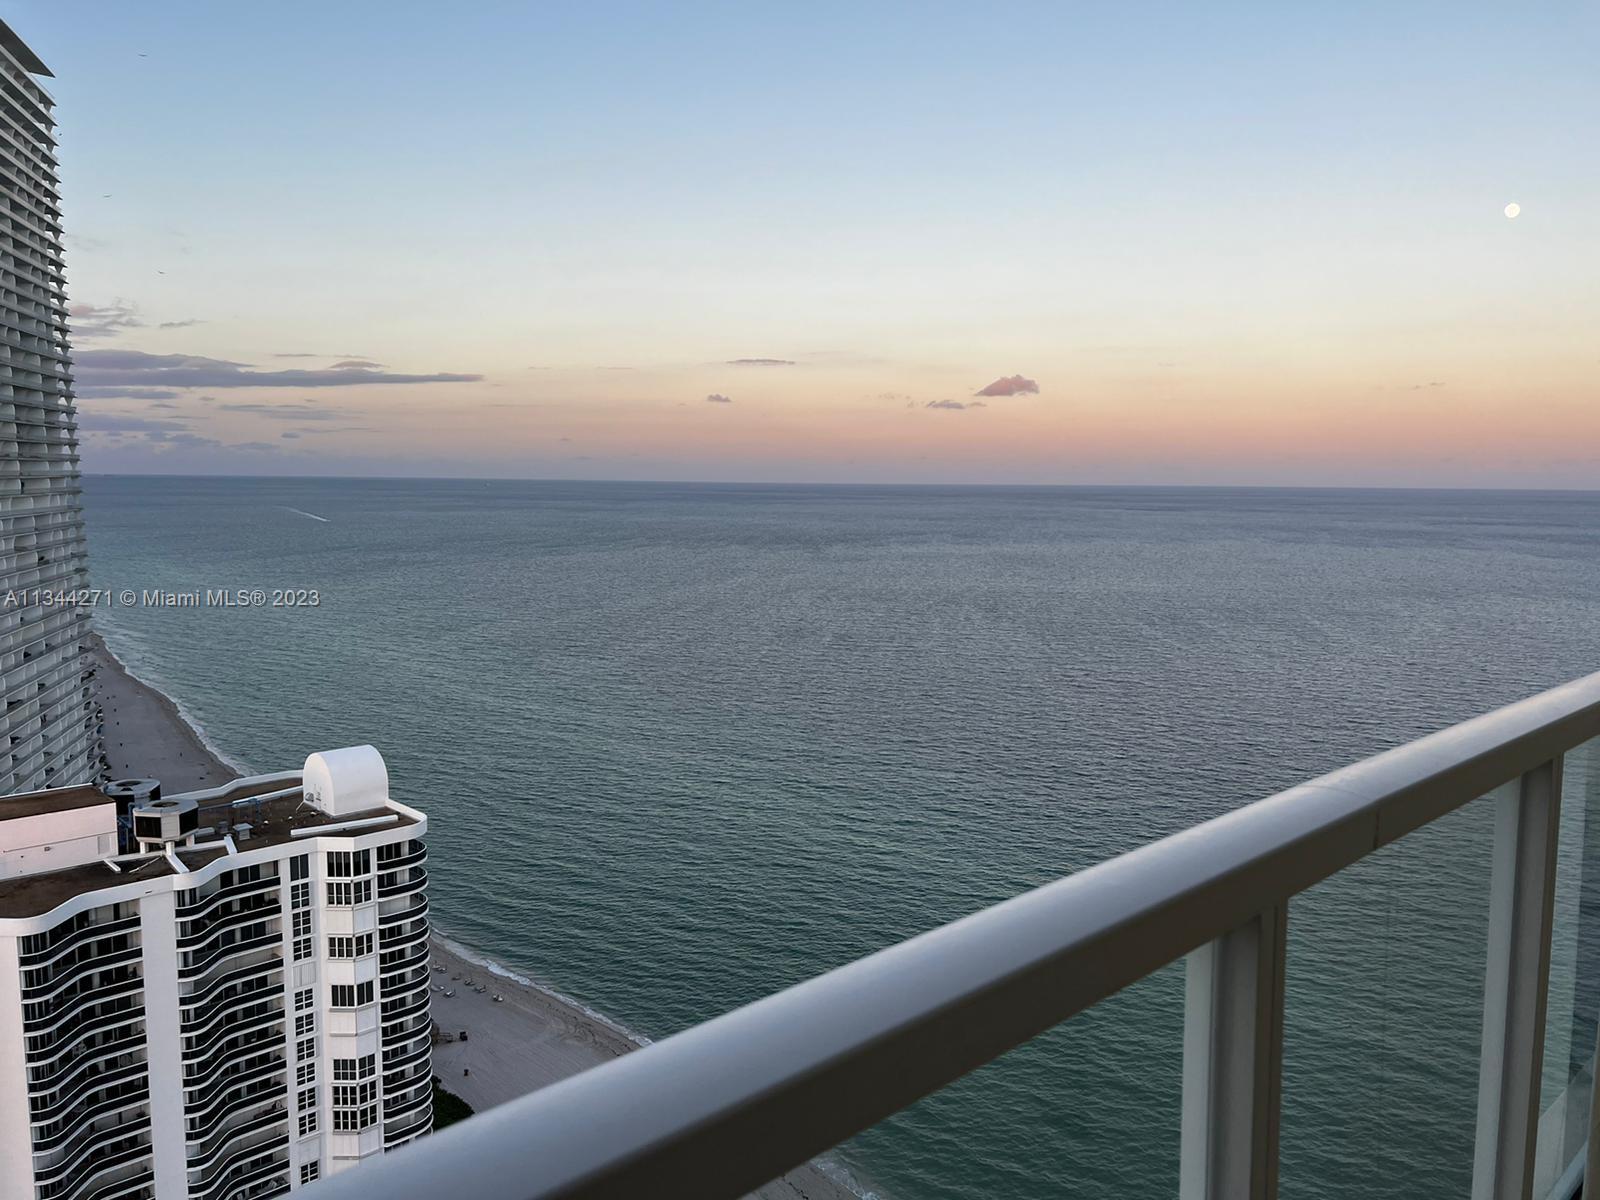 Sunny Isles Beach. Newly updated 2 Bedrooms plus DEN(or third bedroom) 2.5 baths. Furnished unit features fully equipped European style kitchen and bathrooms, high ceilings and three terraces with amazing ocean and city views. La Perla is a full service building with beach service and full amenities, beach chairs, umbrellas, beach towels, pool, gym, Jacuzzi, kids room. ****Offered short term****